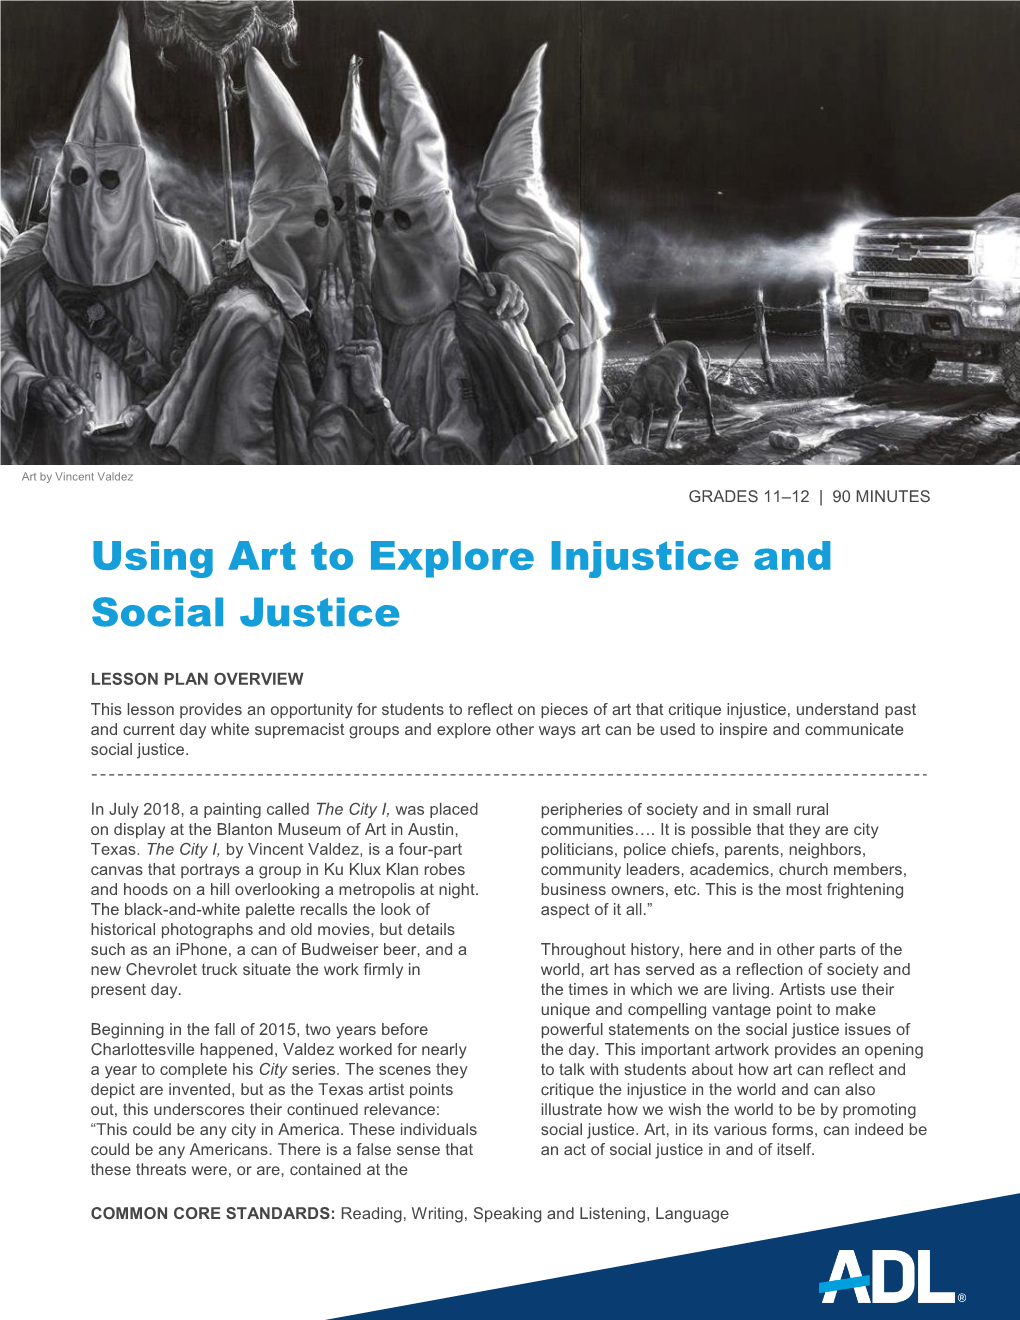 Using Art to Explore Injustice and Social Justice